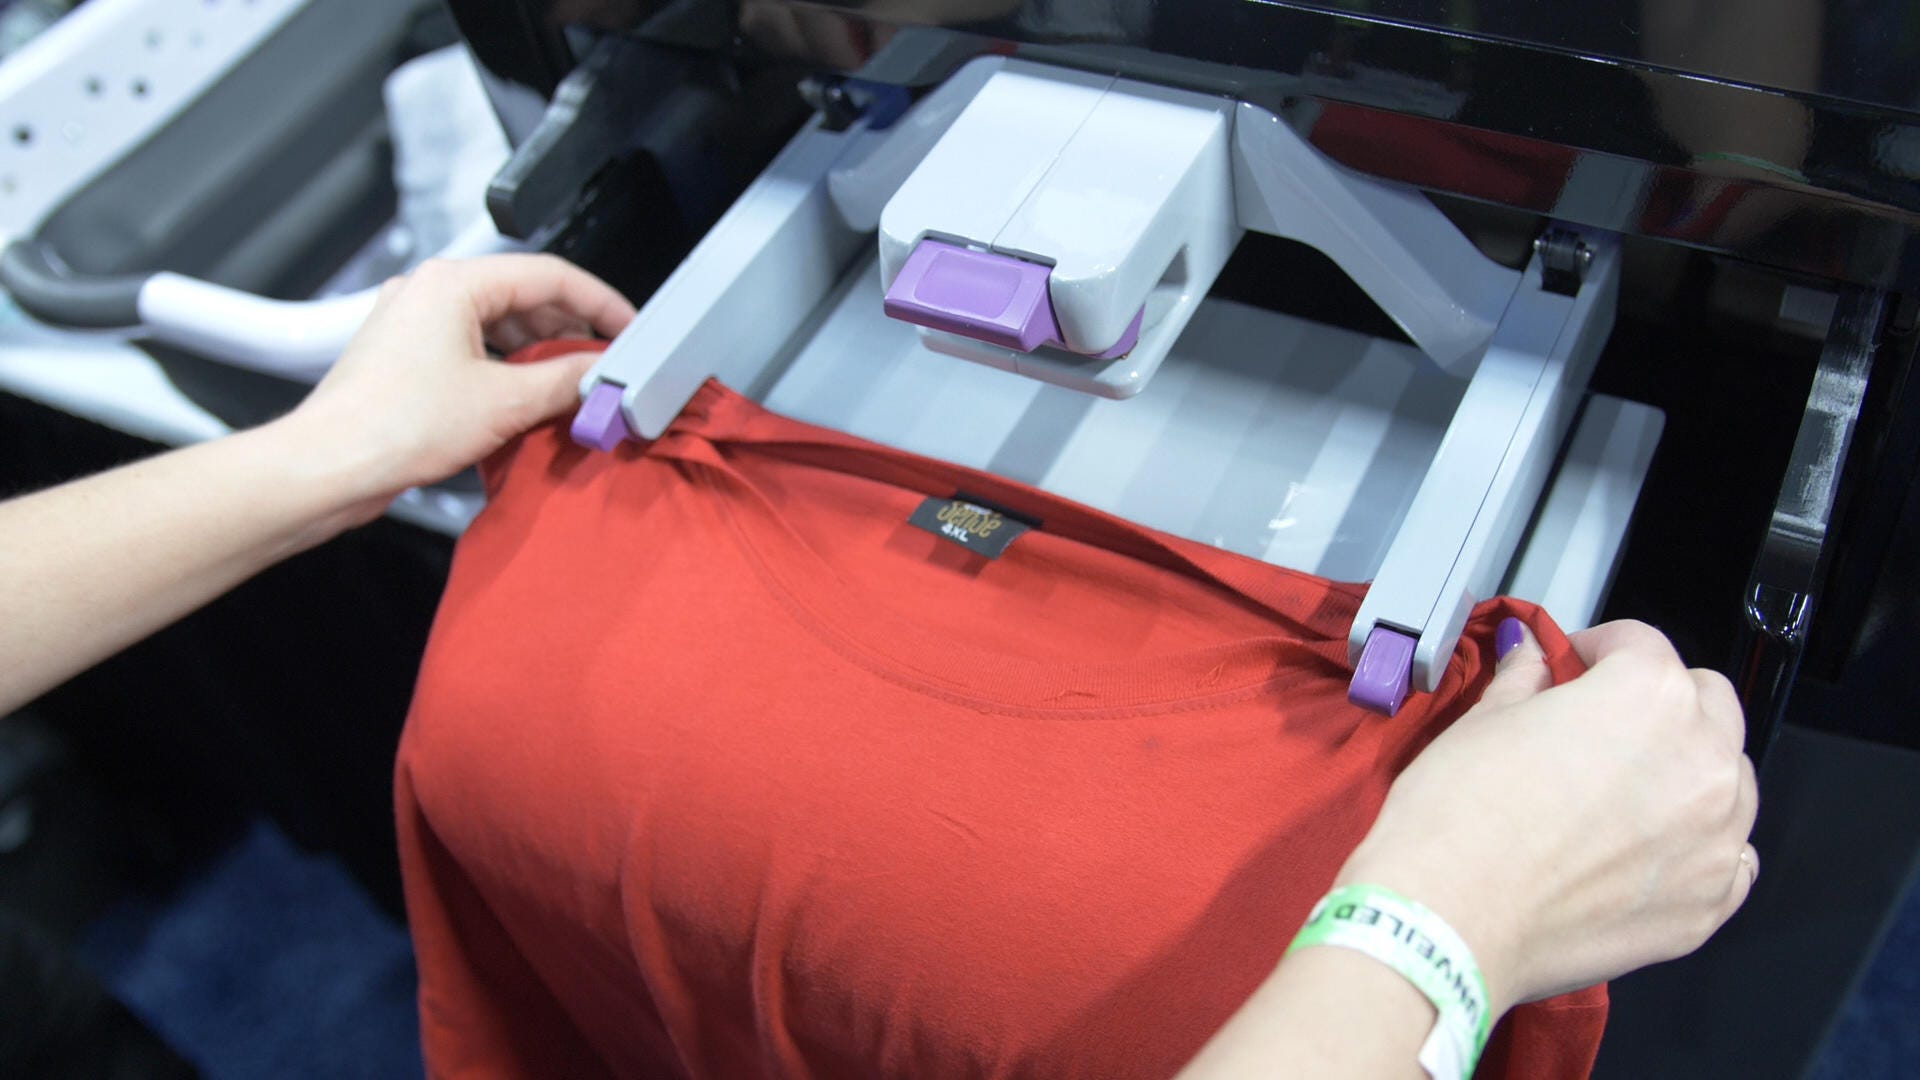 FoldiMate's laundry-folding robot is my favorite bad idea from CES